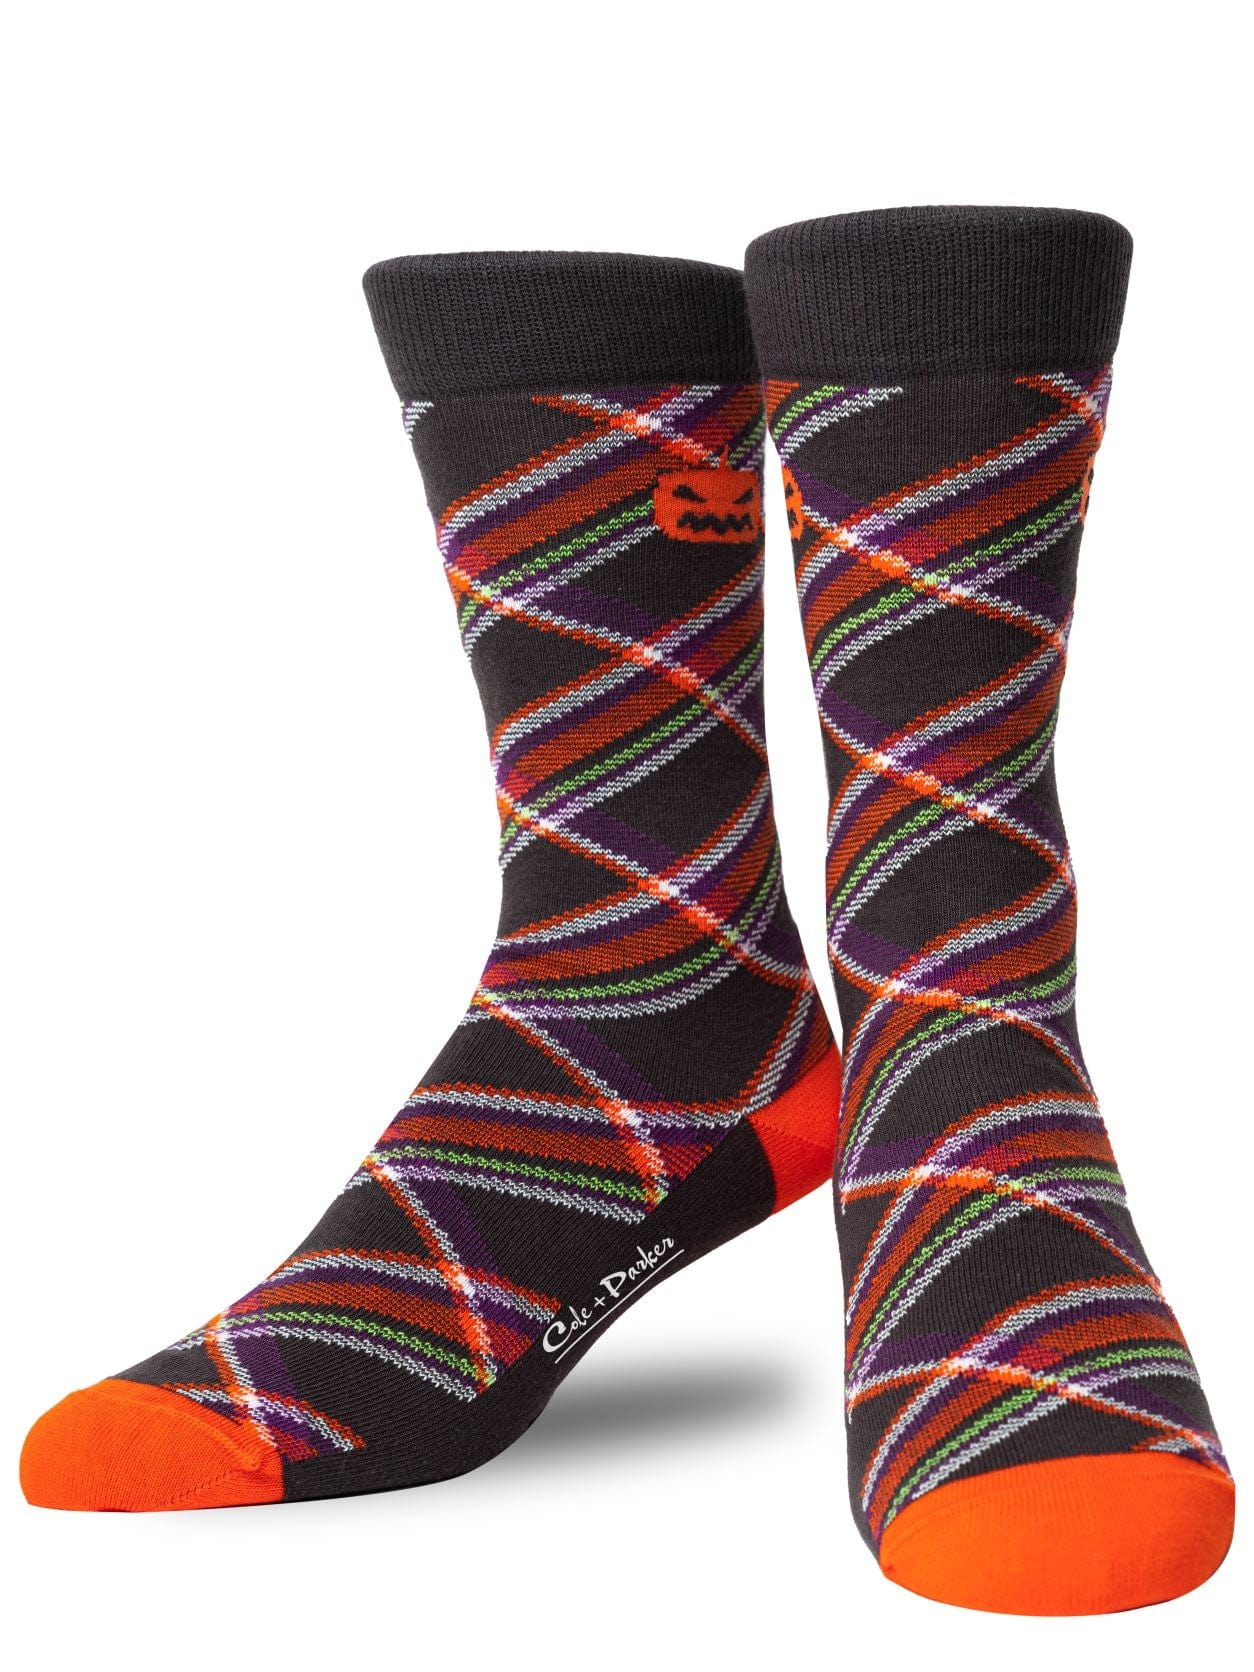 Cole & Parker Halloween Socks Get Your Boo On by Cole and Parker